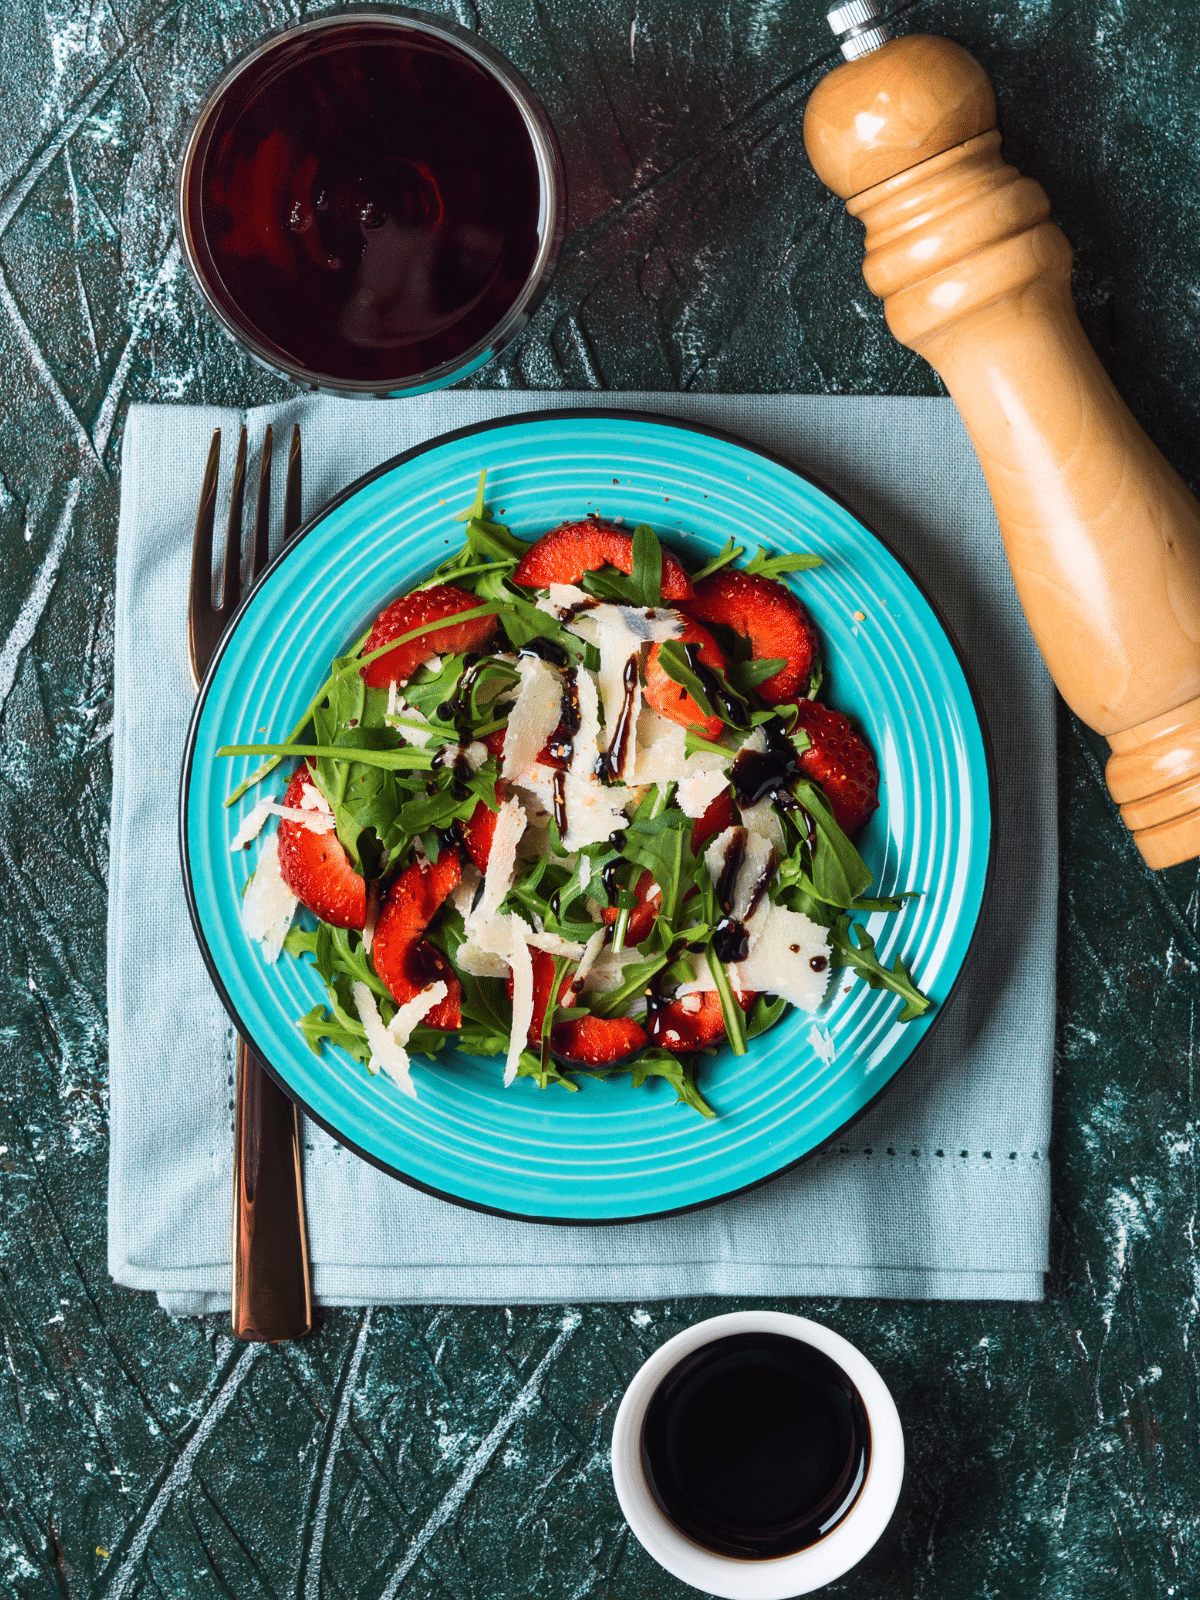 Strawberry salad drizzled with balsamic vinegar, with fork, pepper, and a bowl of balsamic vinegar on the side.